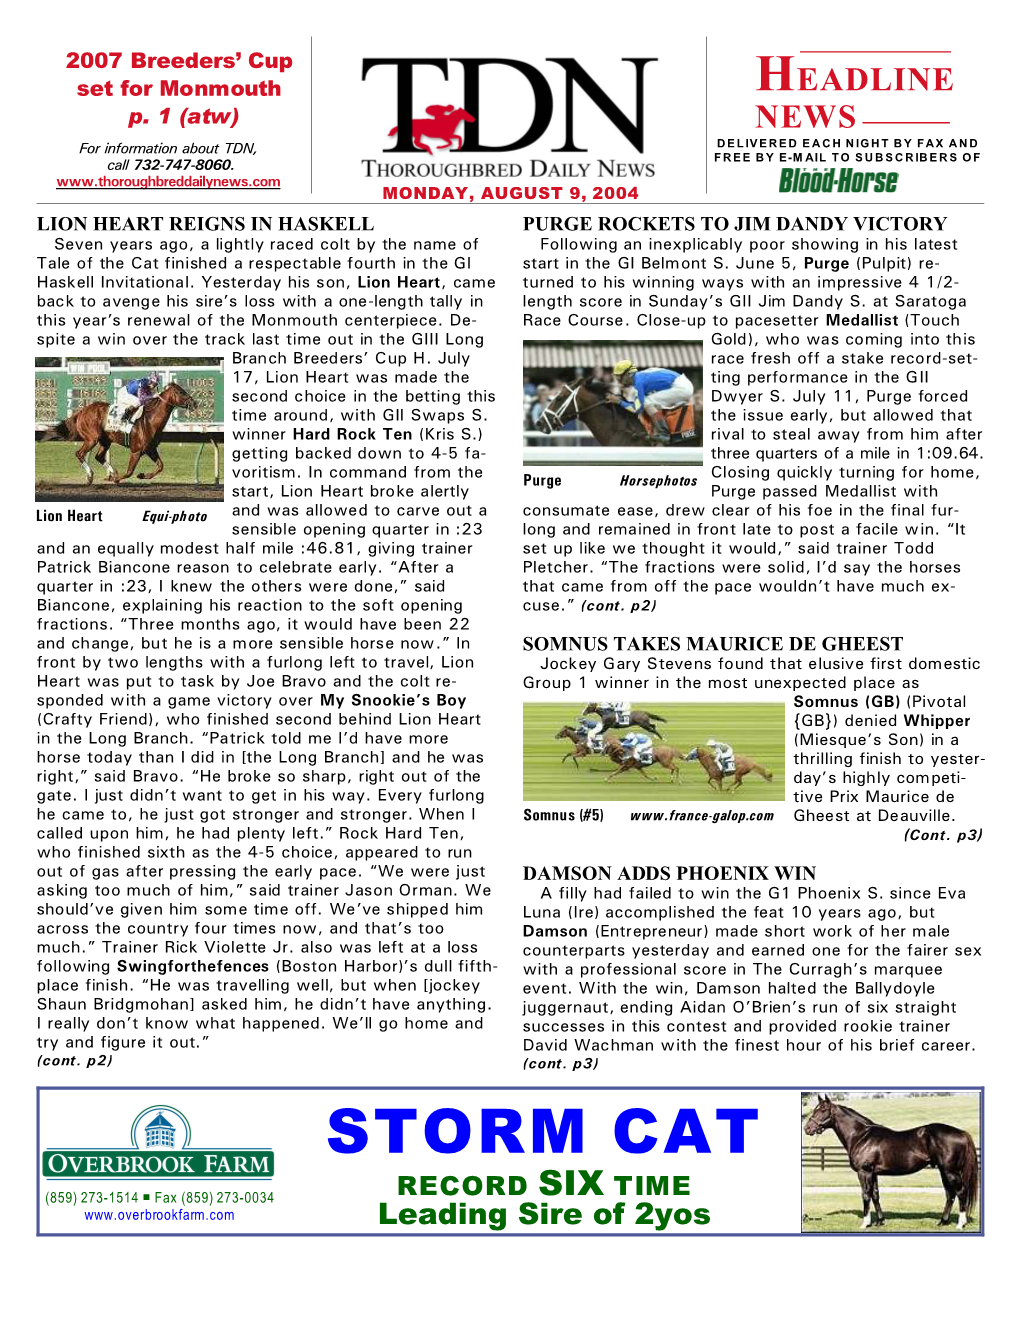 STORM CAT RECORD SIX TIME (859) 273-1514 P Fax (859) 273-0034 Leading Sire of 2Yos TDN P HEADLINE NEWS • 8/9/04 • PAGE 2 of 8